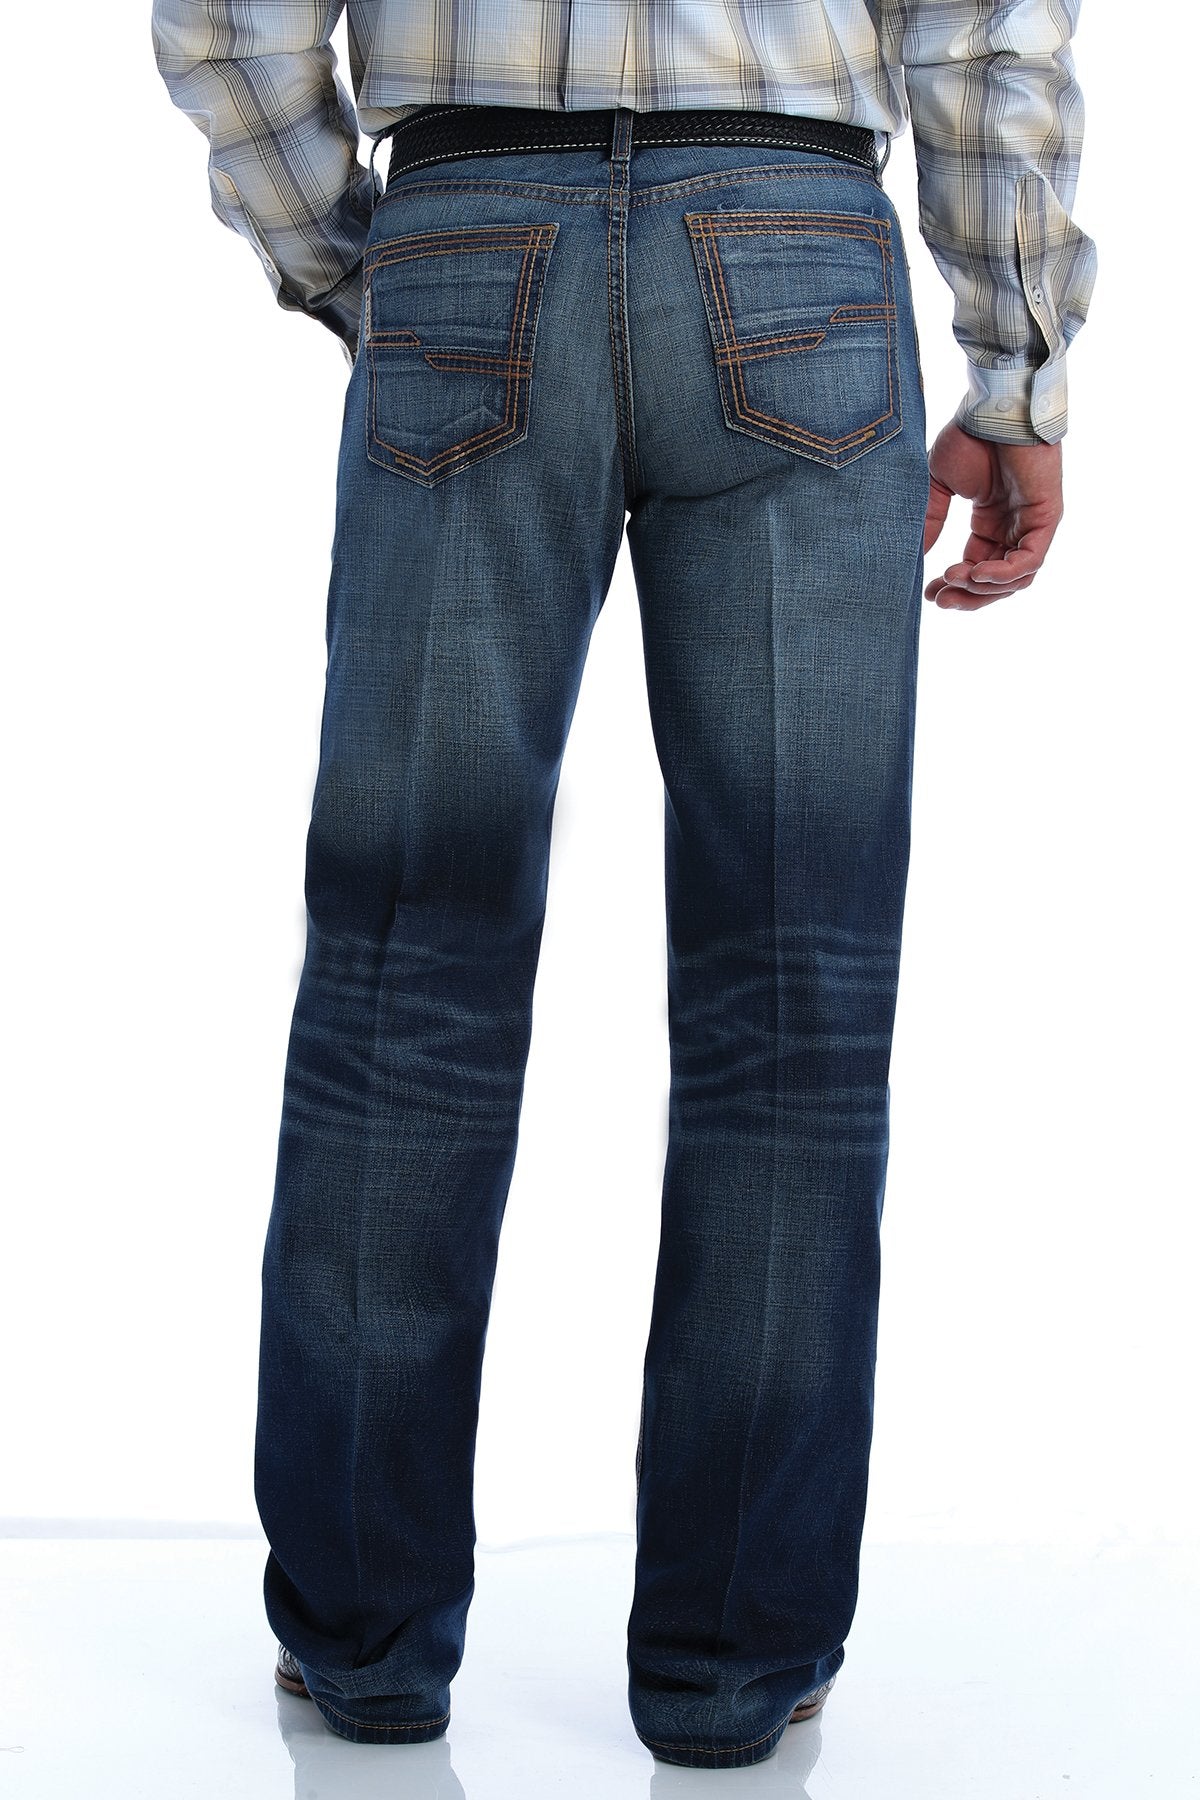 Cinch Mens Relaxed Fit Grant Medium Stonewash Jeans - MB51637001